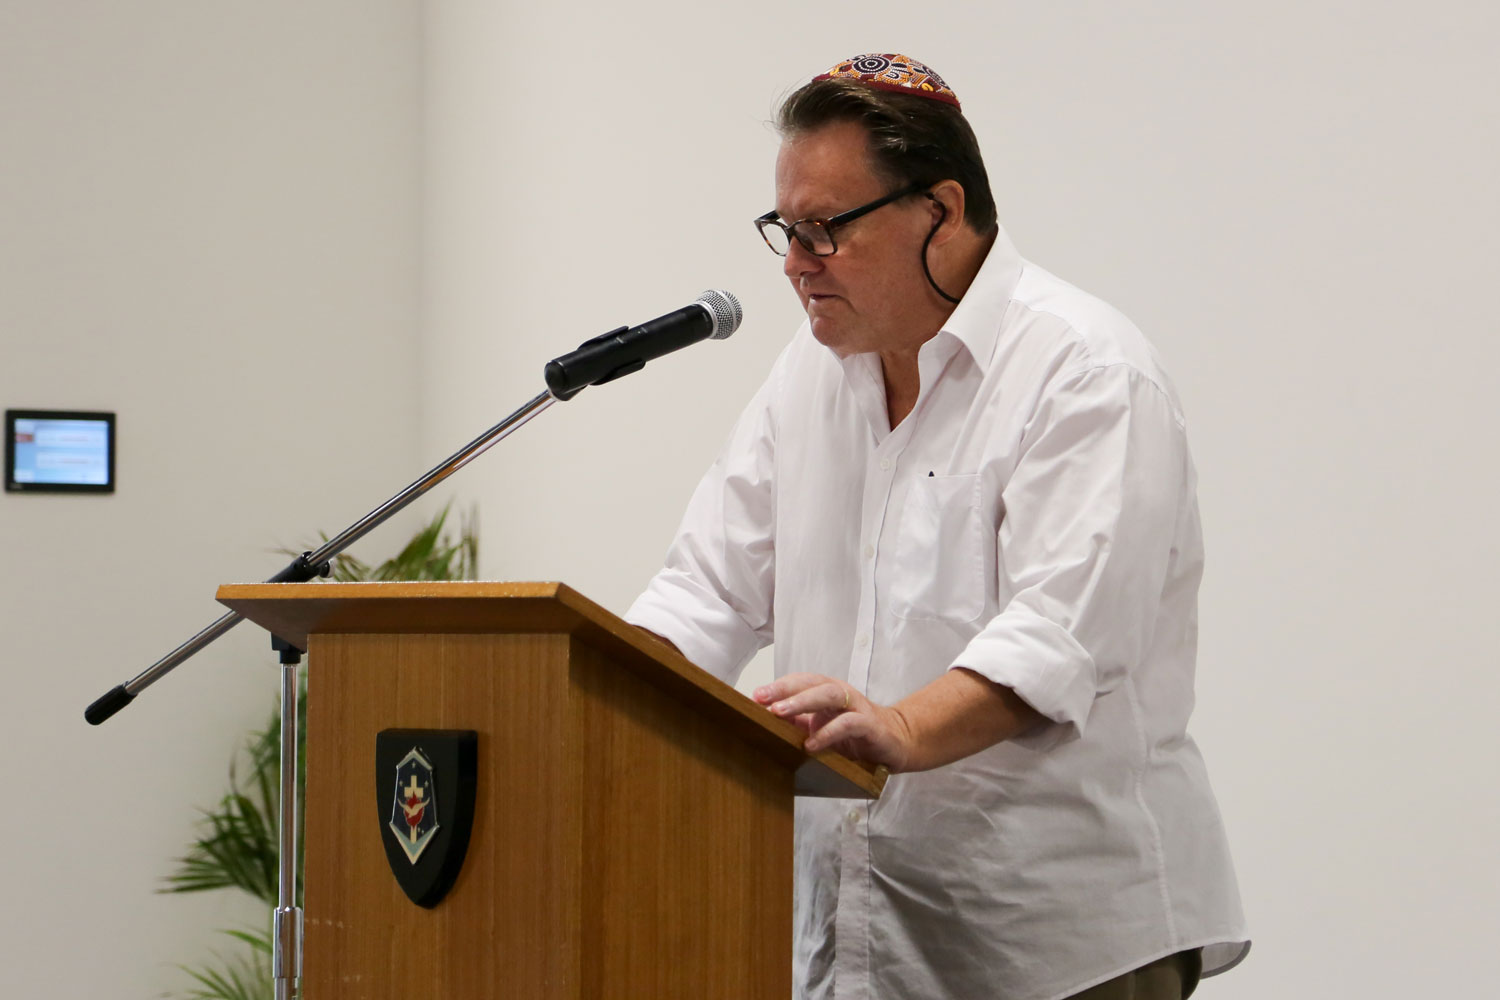 A man in a white shirt wearing a Kippah stands at a lectern talking into a microphone 